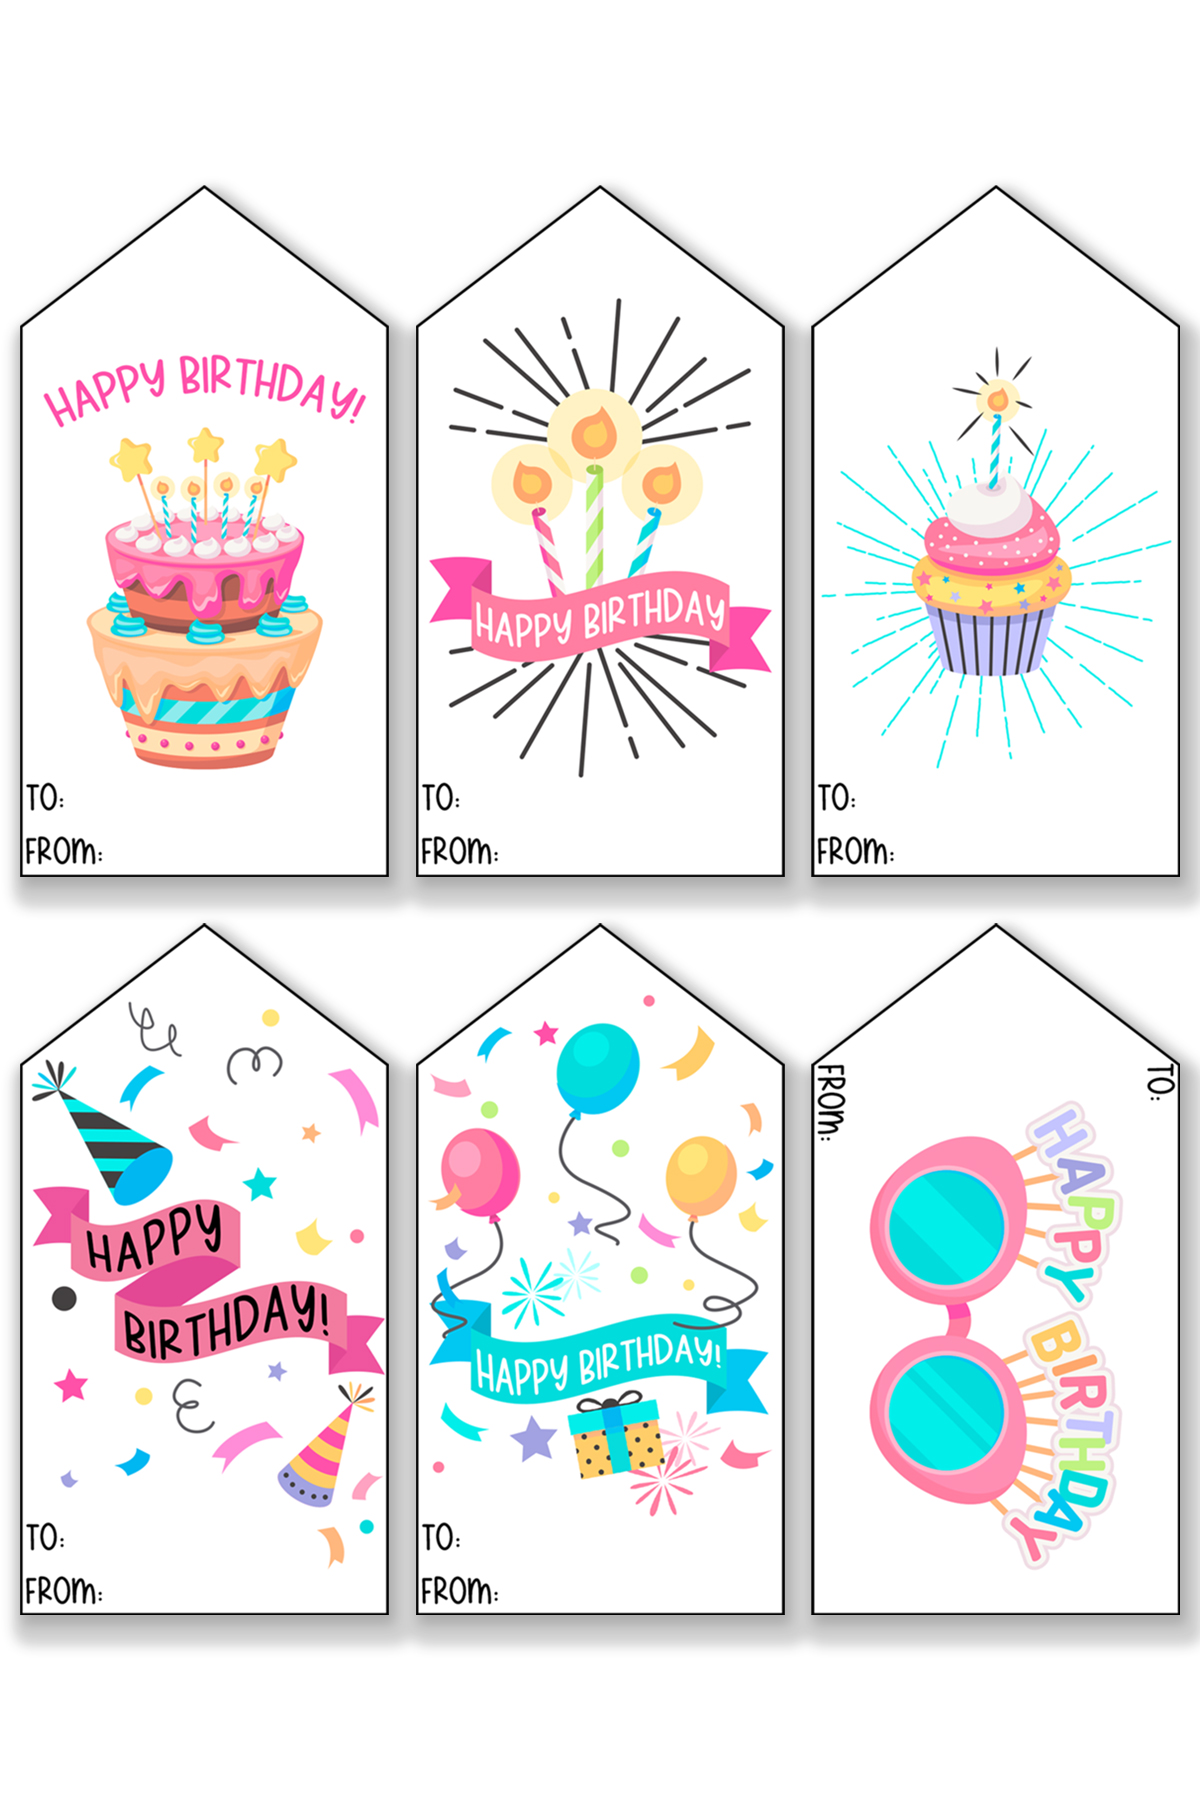 This image is showing one of the free printable birthday tags set - each tag has a different generic birthday design.